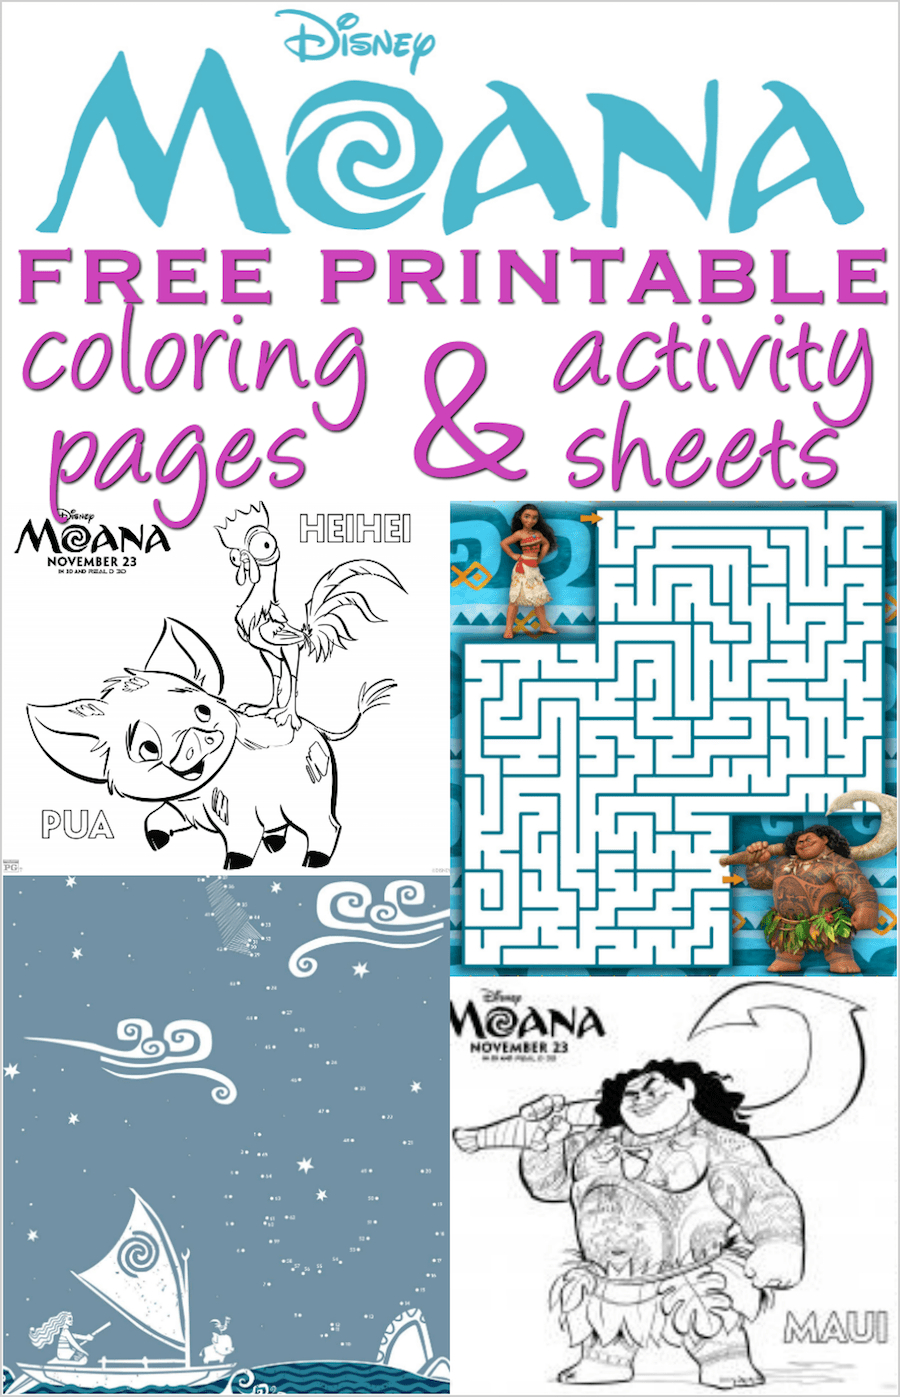 Moana Coloring Pages And Activity Sheets - Over 30 Free Disney - Free Disney Activity Printables